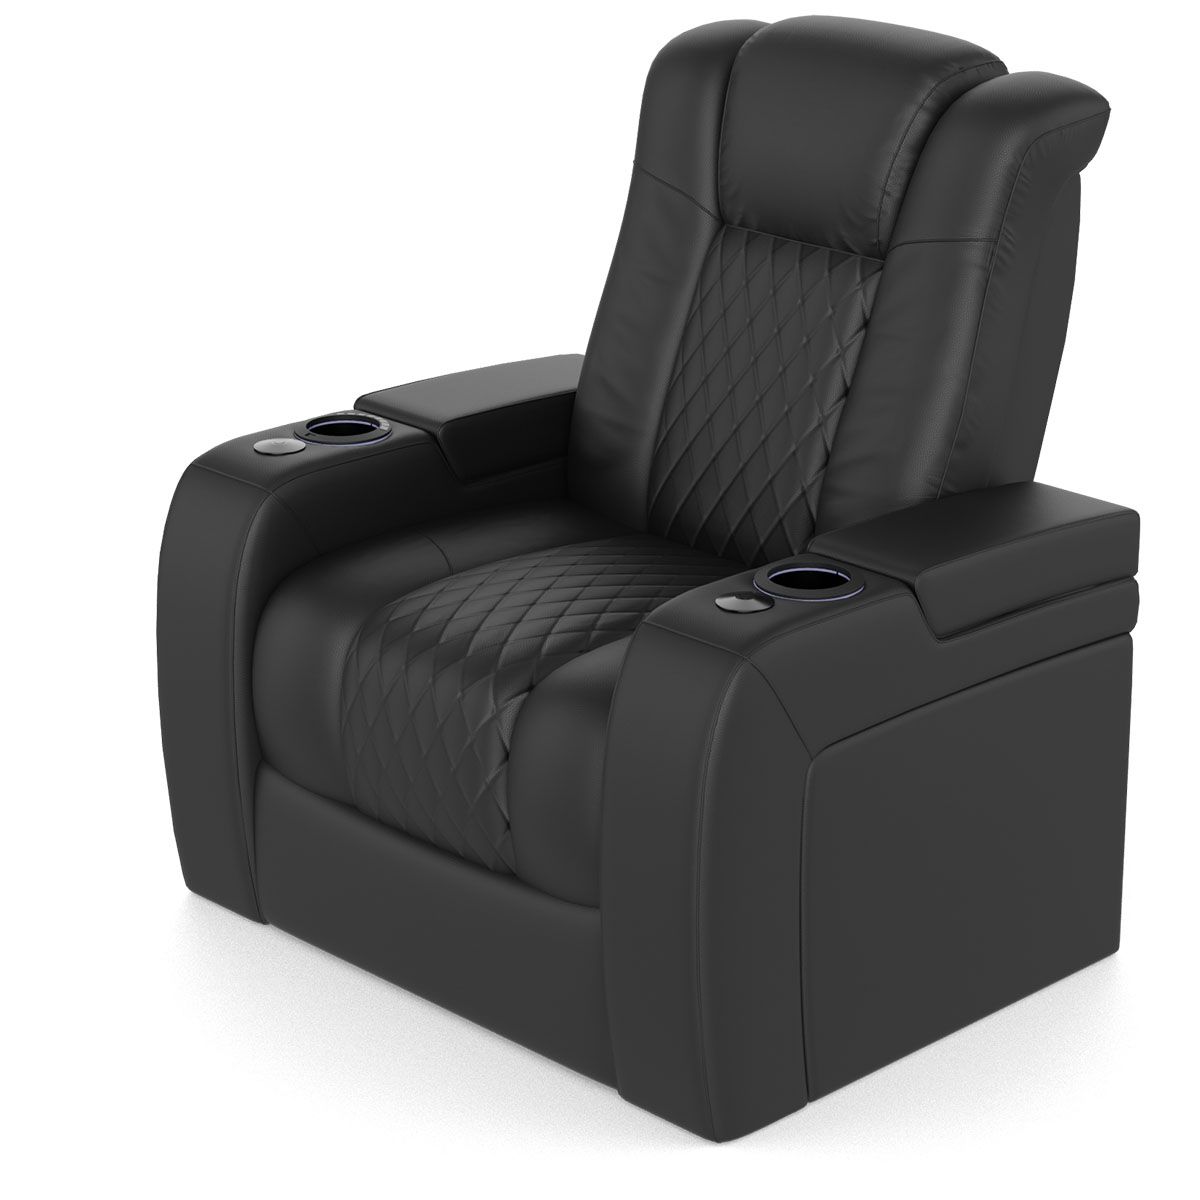 Audio Advice Revelation Home Theater Seating - right angled top view of 2 arm chair